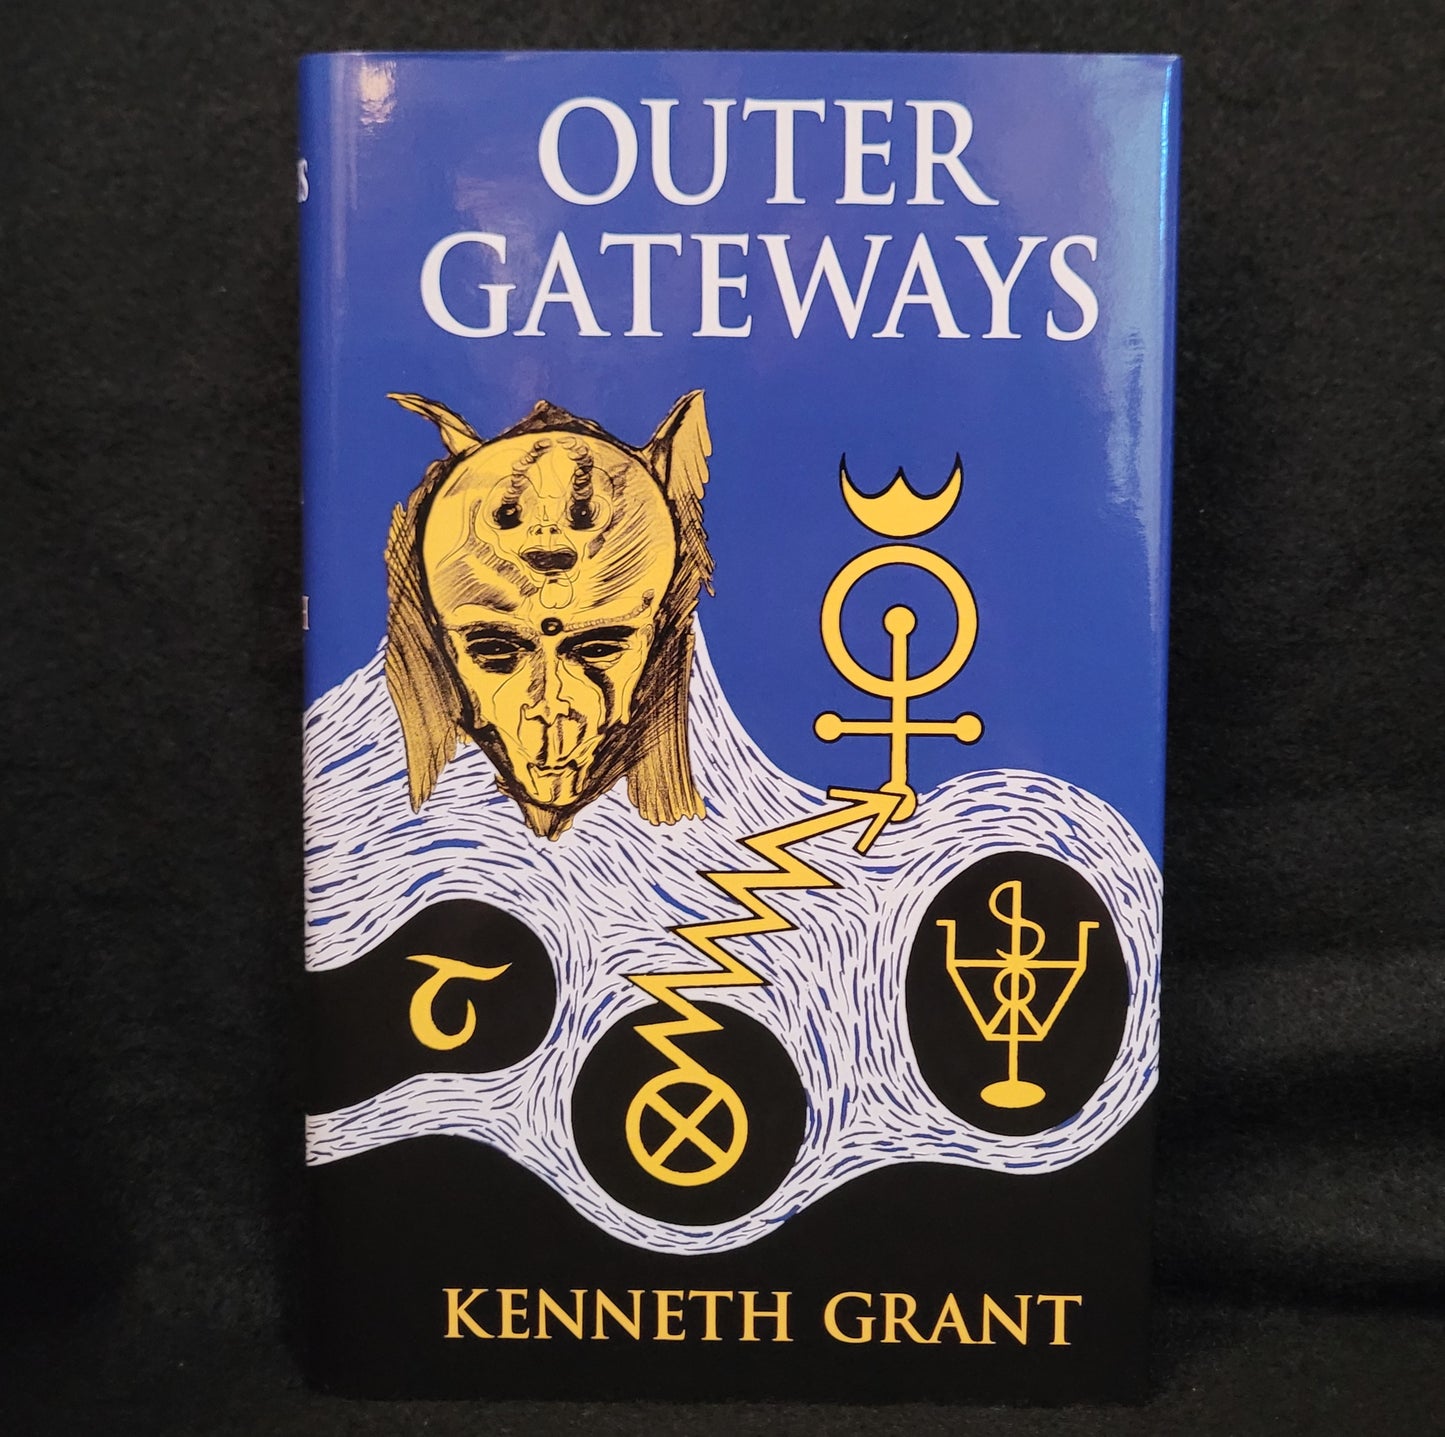 Outer Gateways by Kenneth Grant Enhanced Hardcover Edition (Starfire Publishing, 2015)